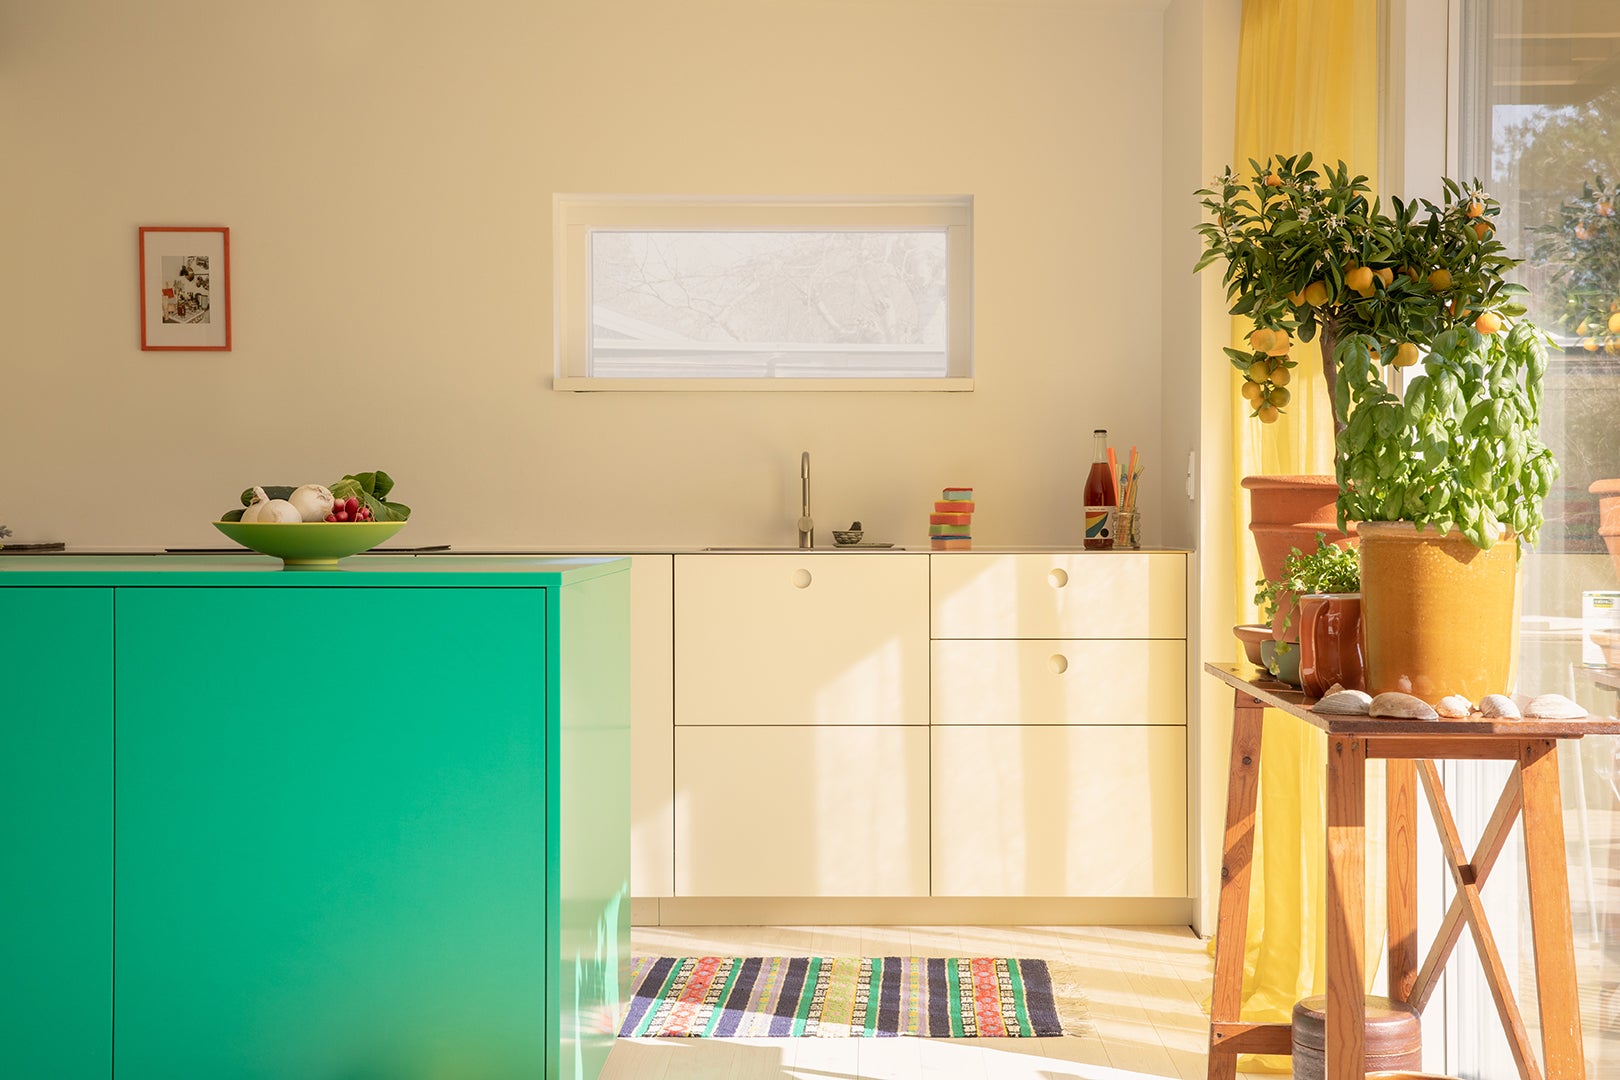 The Kelly Green Island in This Danish Kitchen Is Made From the Same Material as Cutting Boards